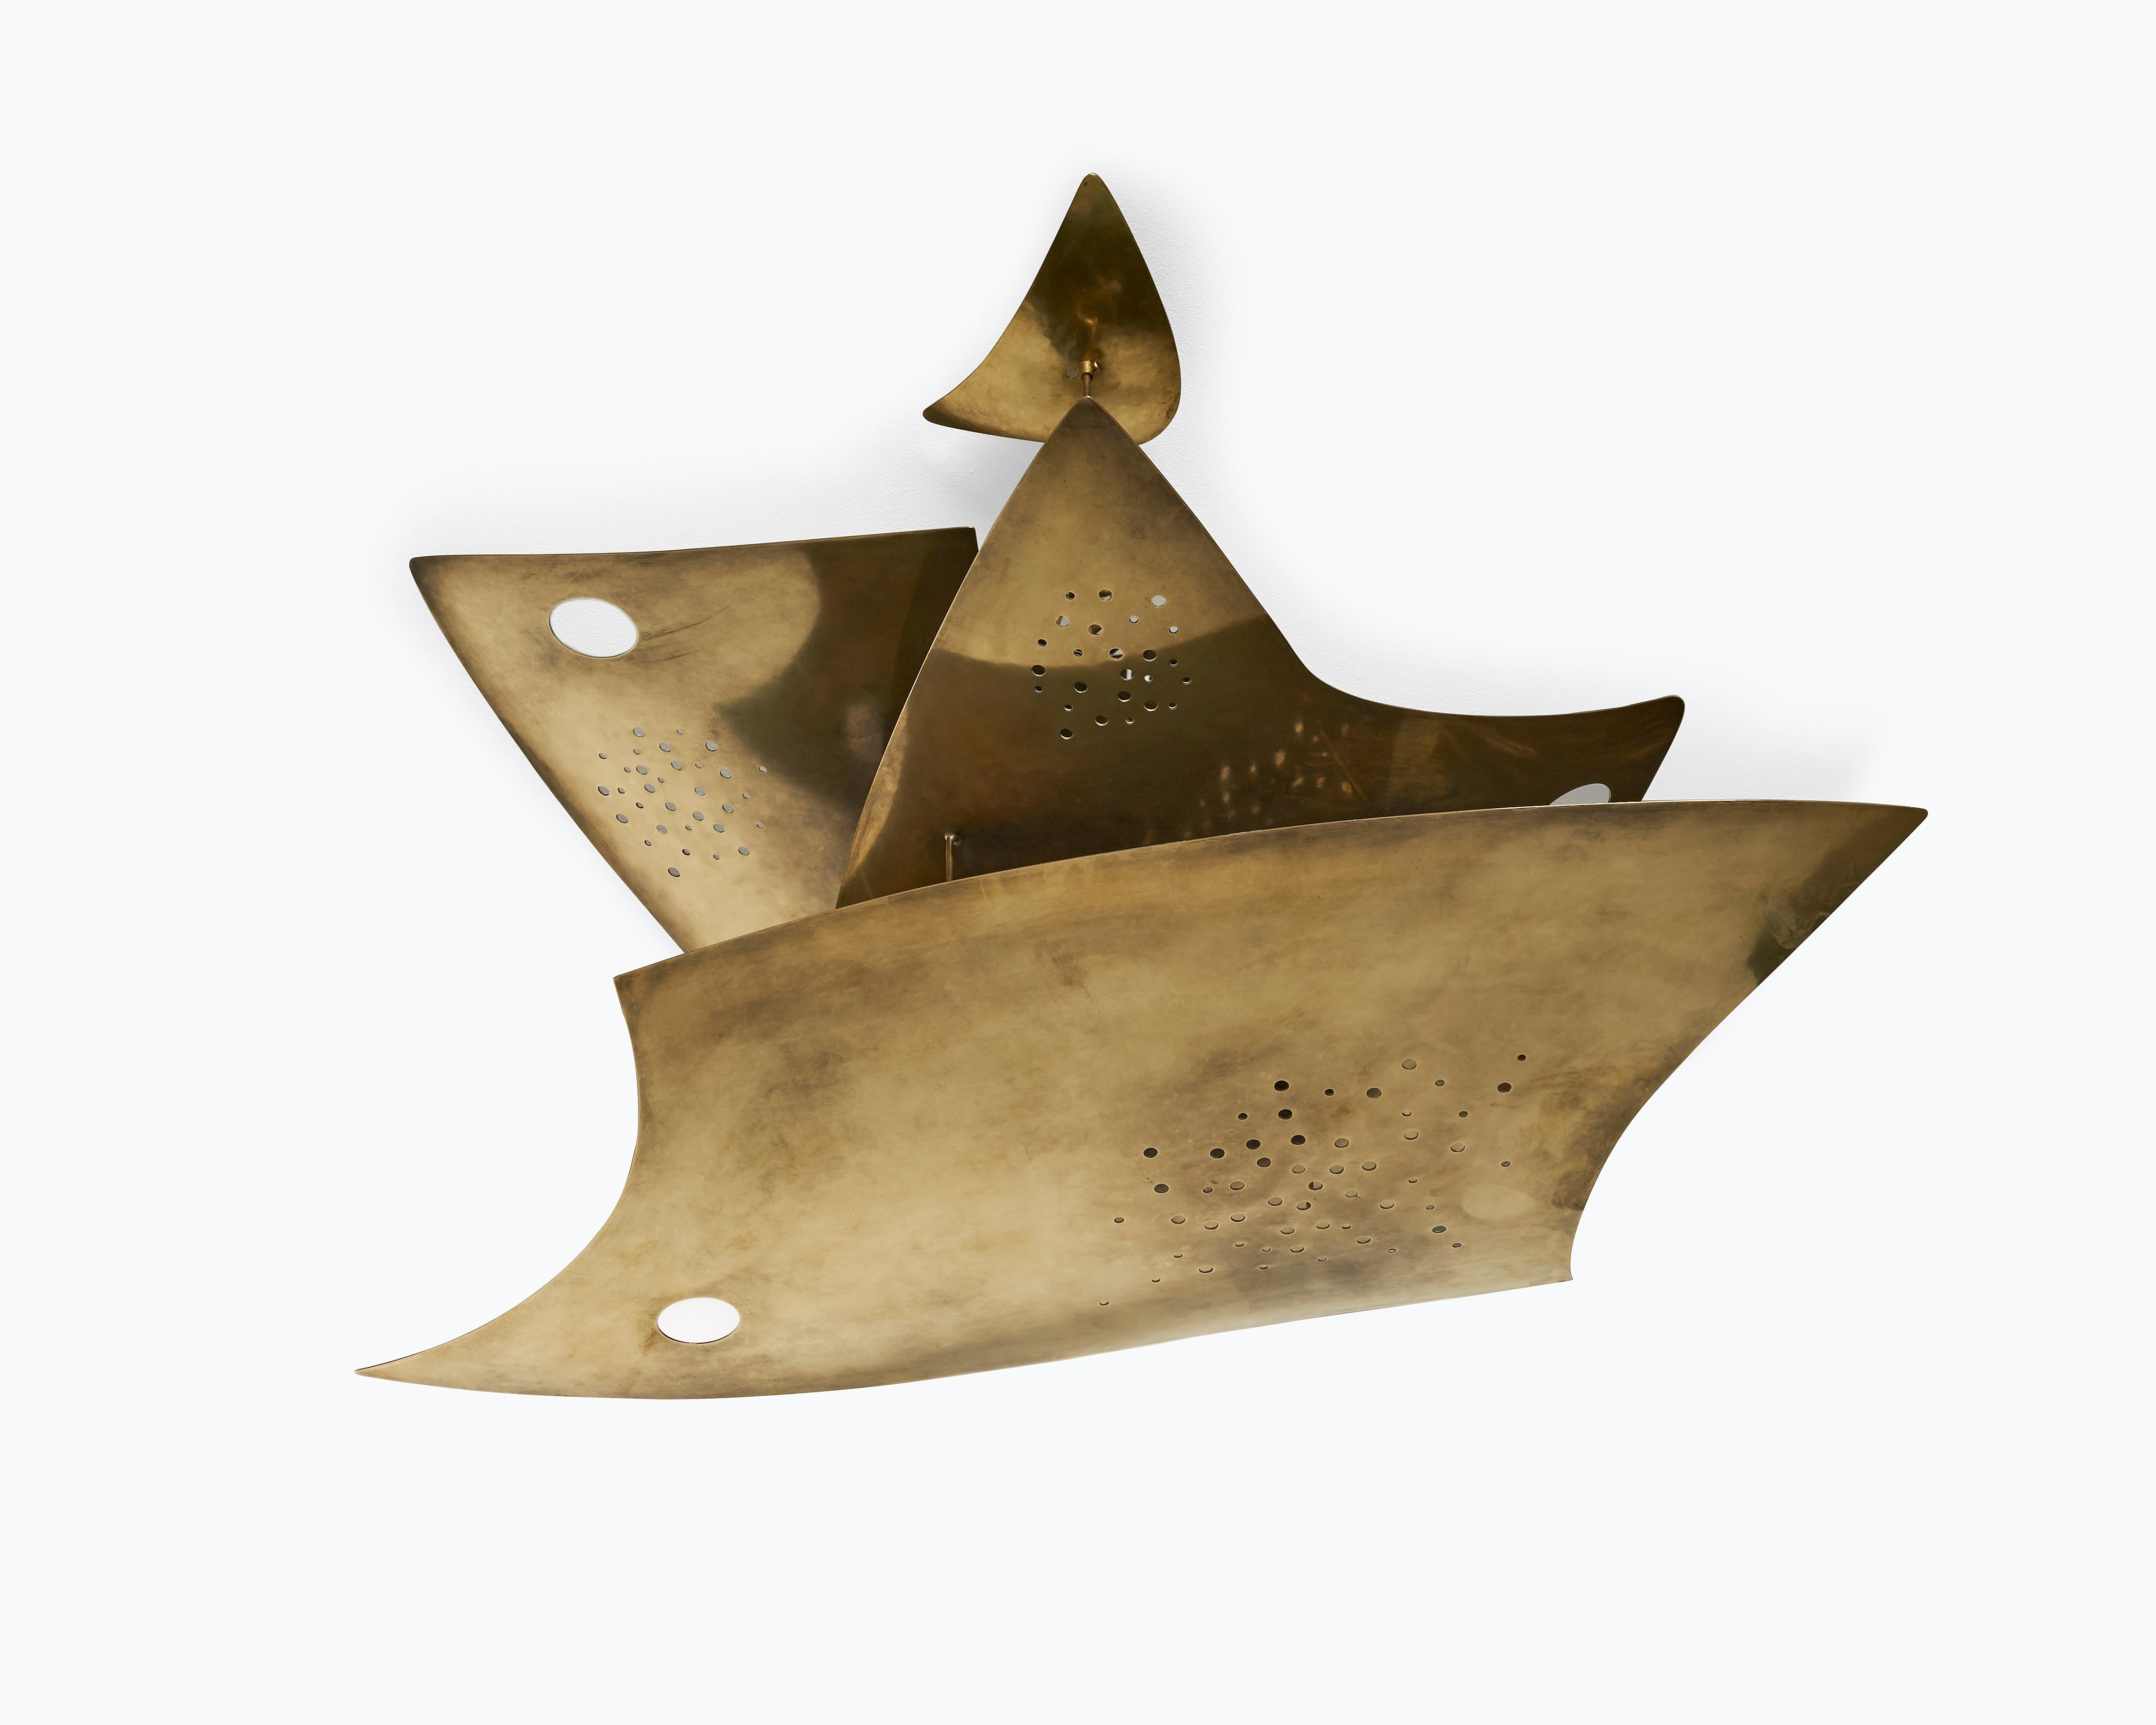 Leaves of hammered wrought brass.
Signed and numbered, after an original model from 1960.
Editions of 8 ex. + 4 artist’s proof .
JM Lelouch Editions.
Former collection of Marquis de Ségur, featured at the exhibition “Antagonisme 2 - L’Objet” at